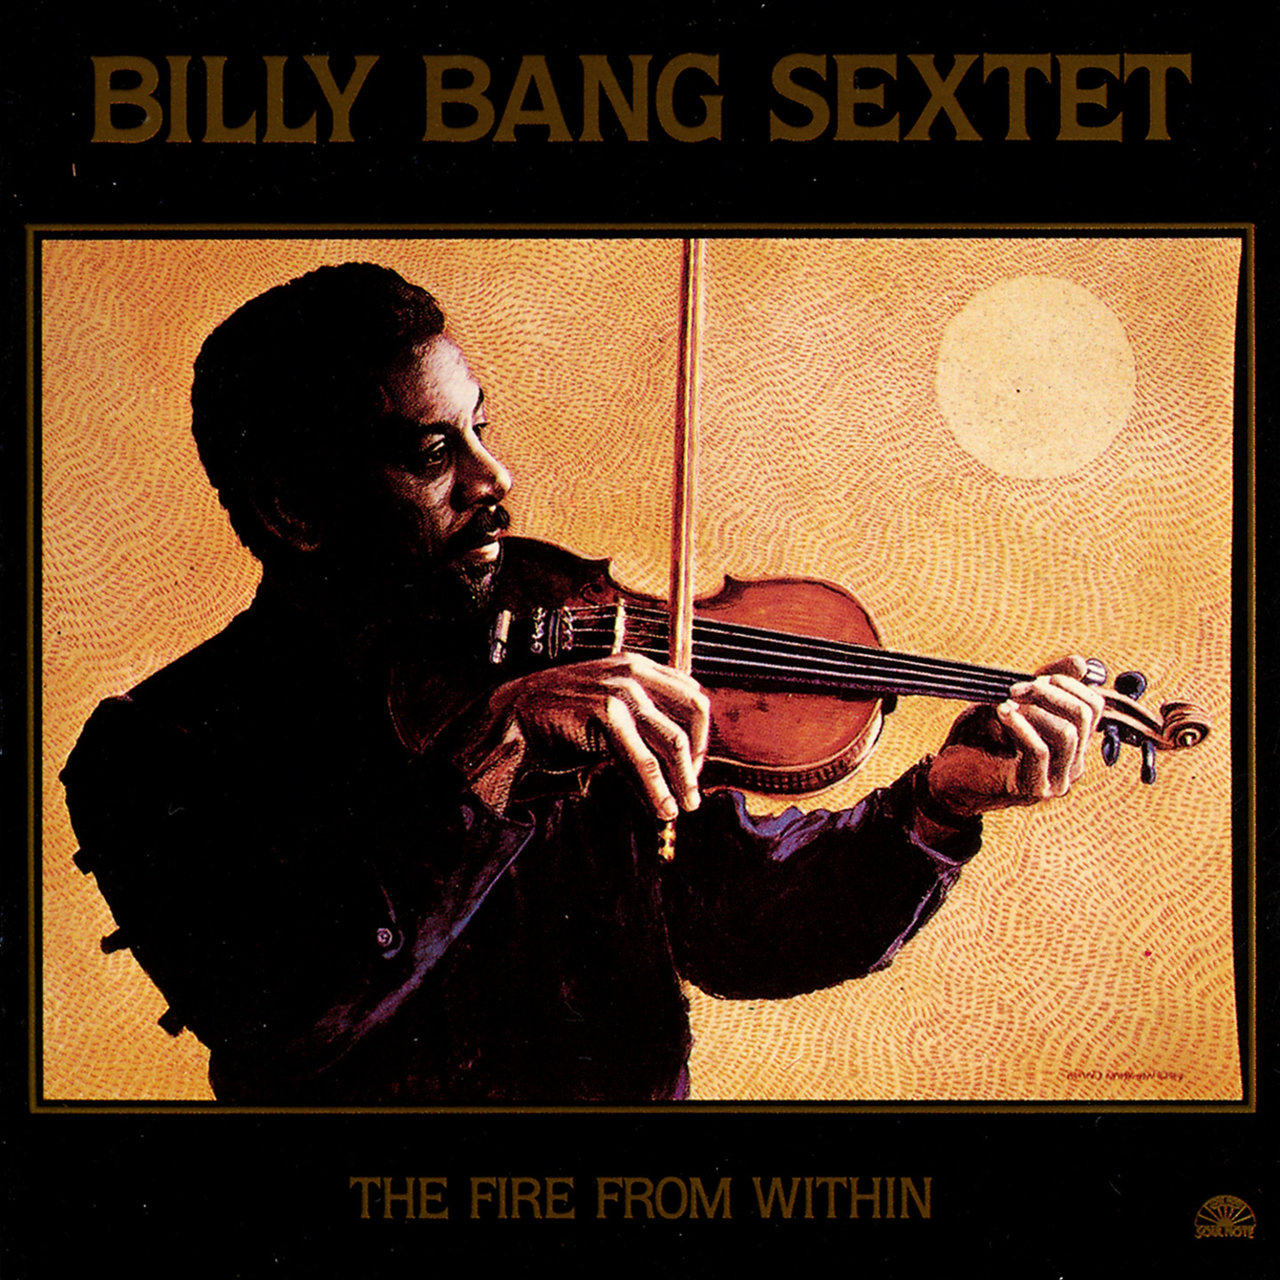 Billy Bang Sextet 'The Fire From Within'